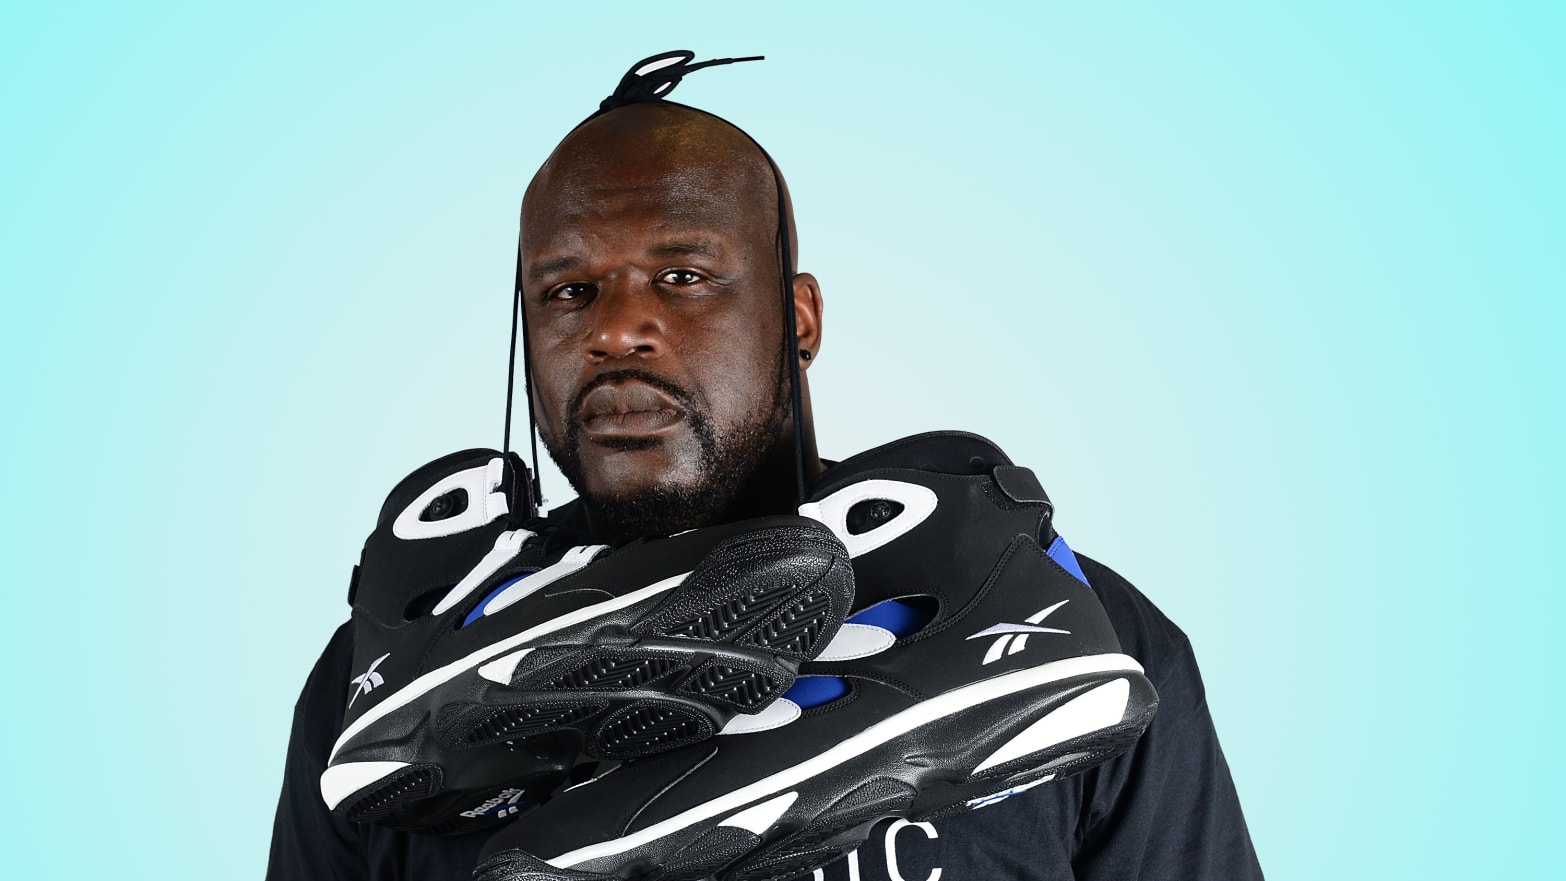 Quotes From Shaq To Make You Think About Life - On3